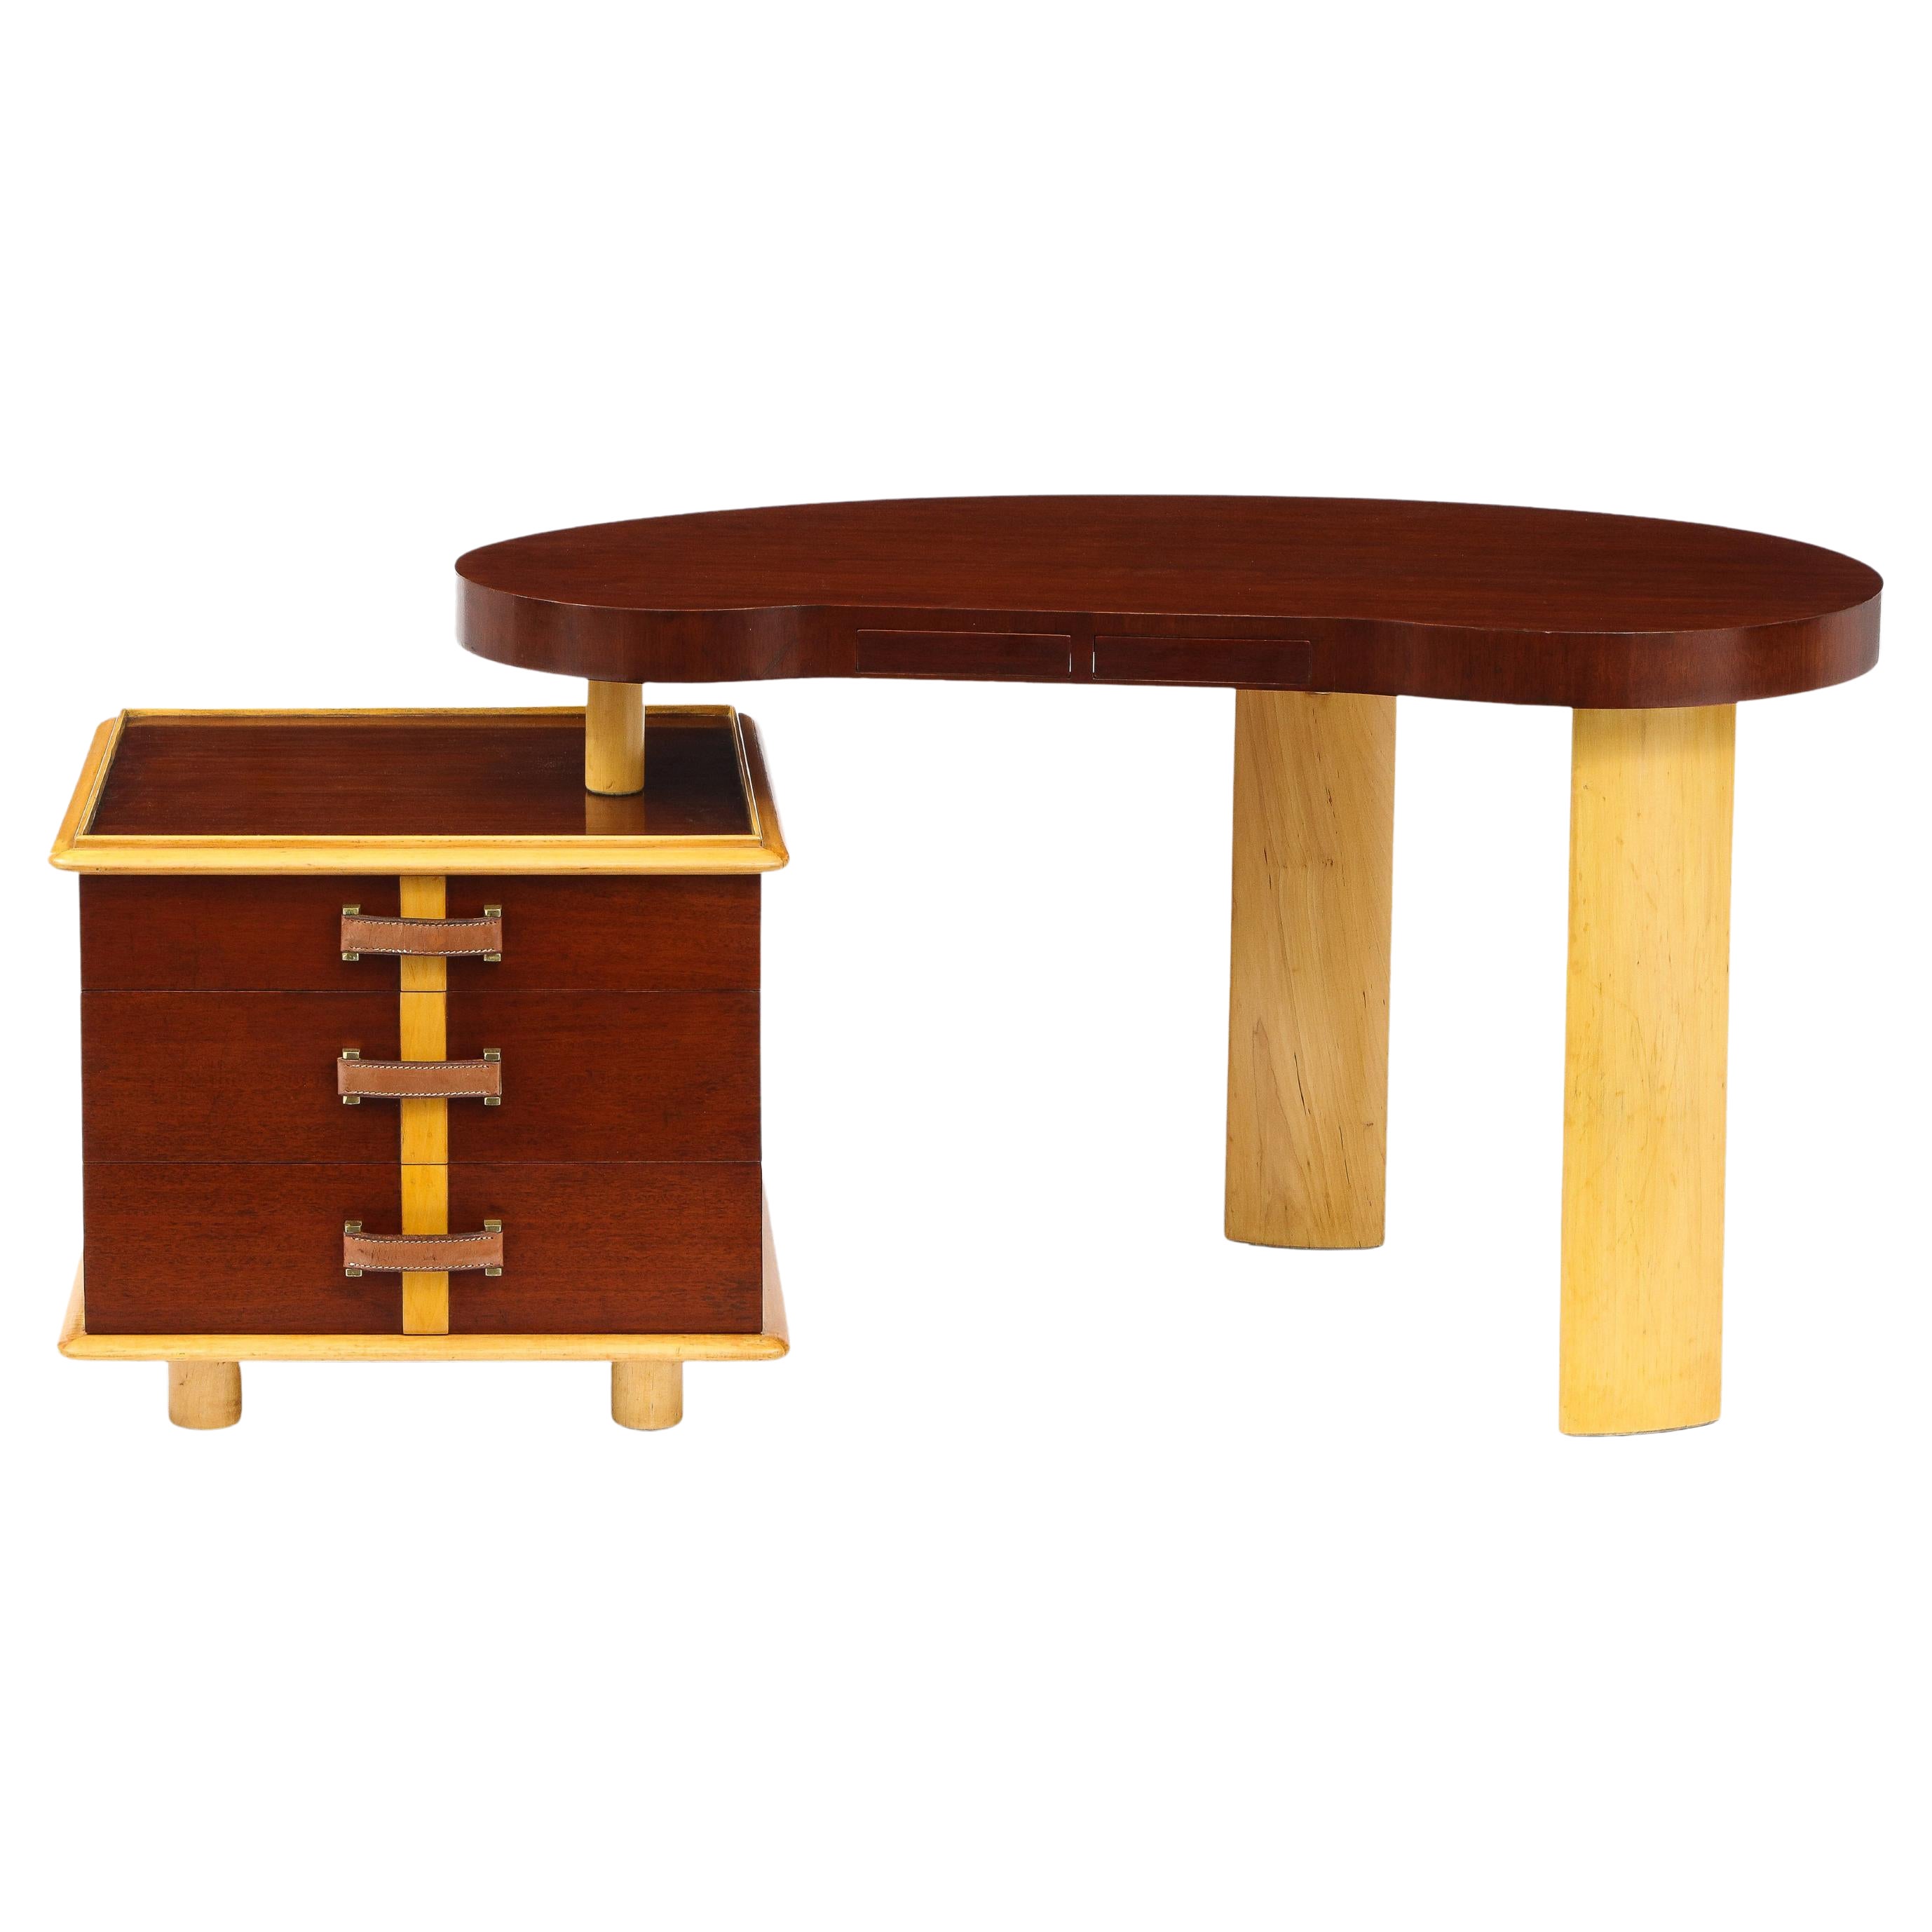 Paul Frankl Rare Kidney Desk in Mahogany, Birch, Leather and Brass, USA, 1950s